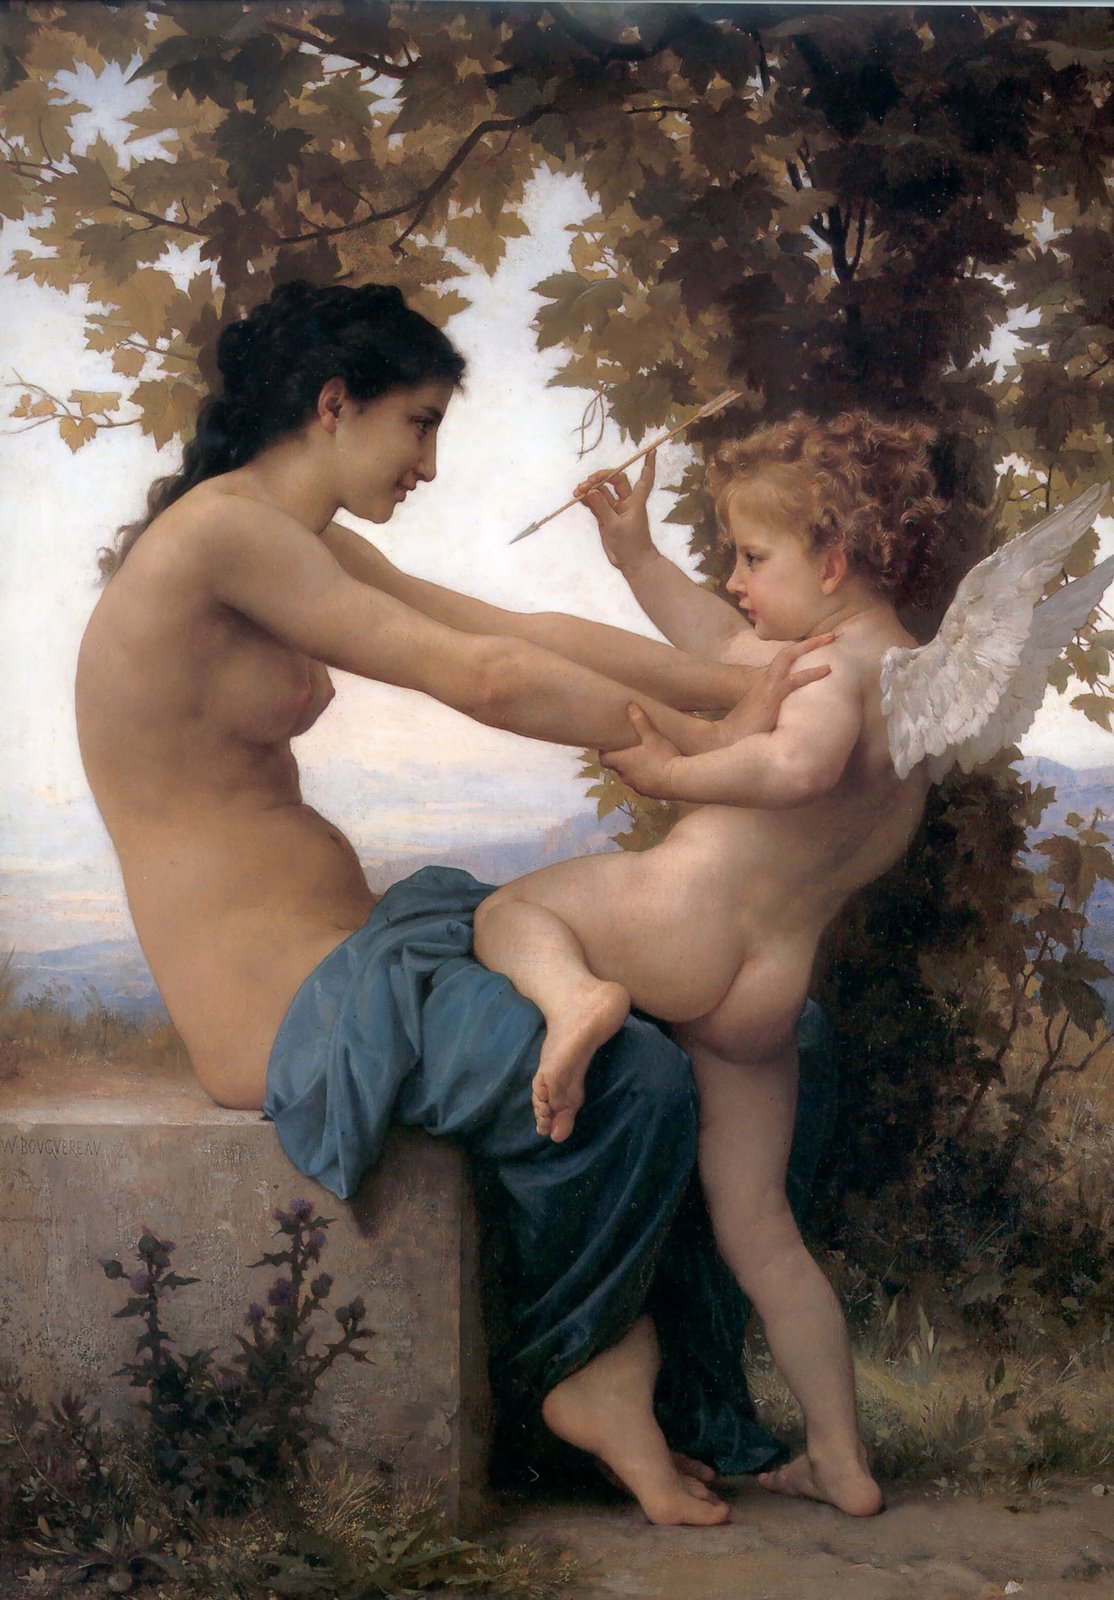 [William-Adolphe_Bouguereau_(1825-1905)_-_A_Young_Girl_Defending_Herself_Against_Eros_(1880).jpg]